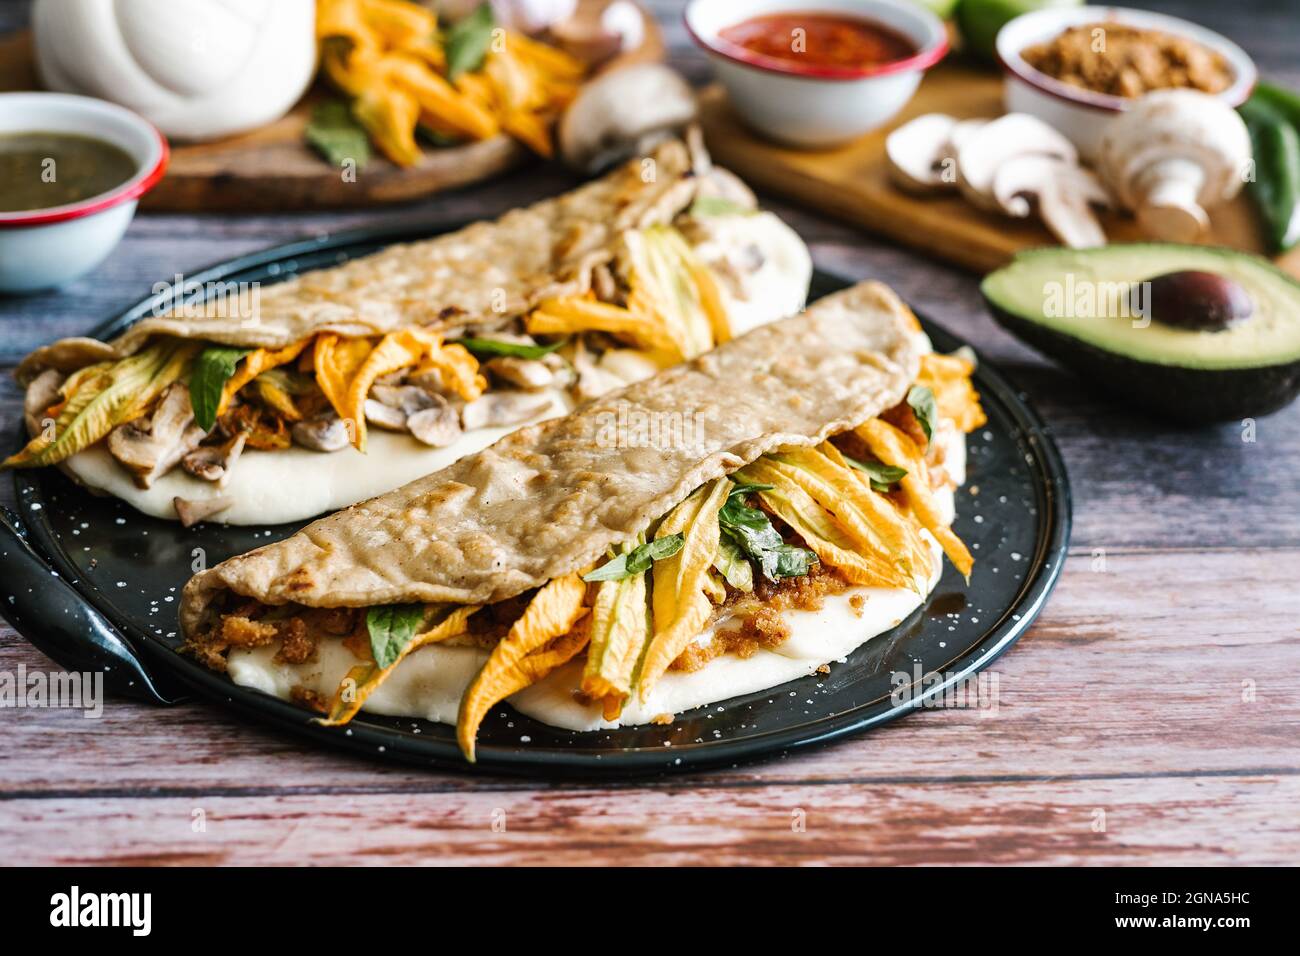 https://c8.alamy.com/comp/2GNA5HC/mexican-quesadilla-as-a-delicious-breakfast-from-the-city-of-puebla-in-mexico-2GNA5HC.jpg